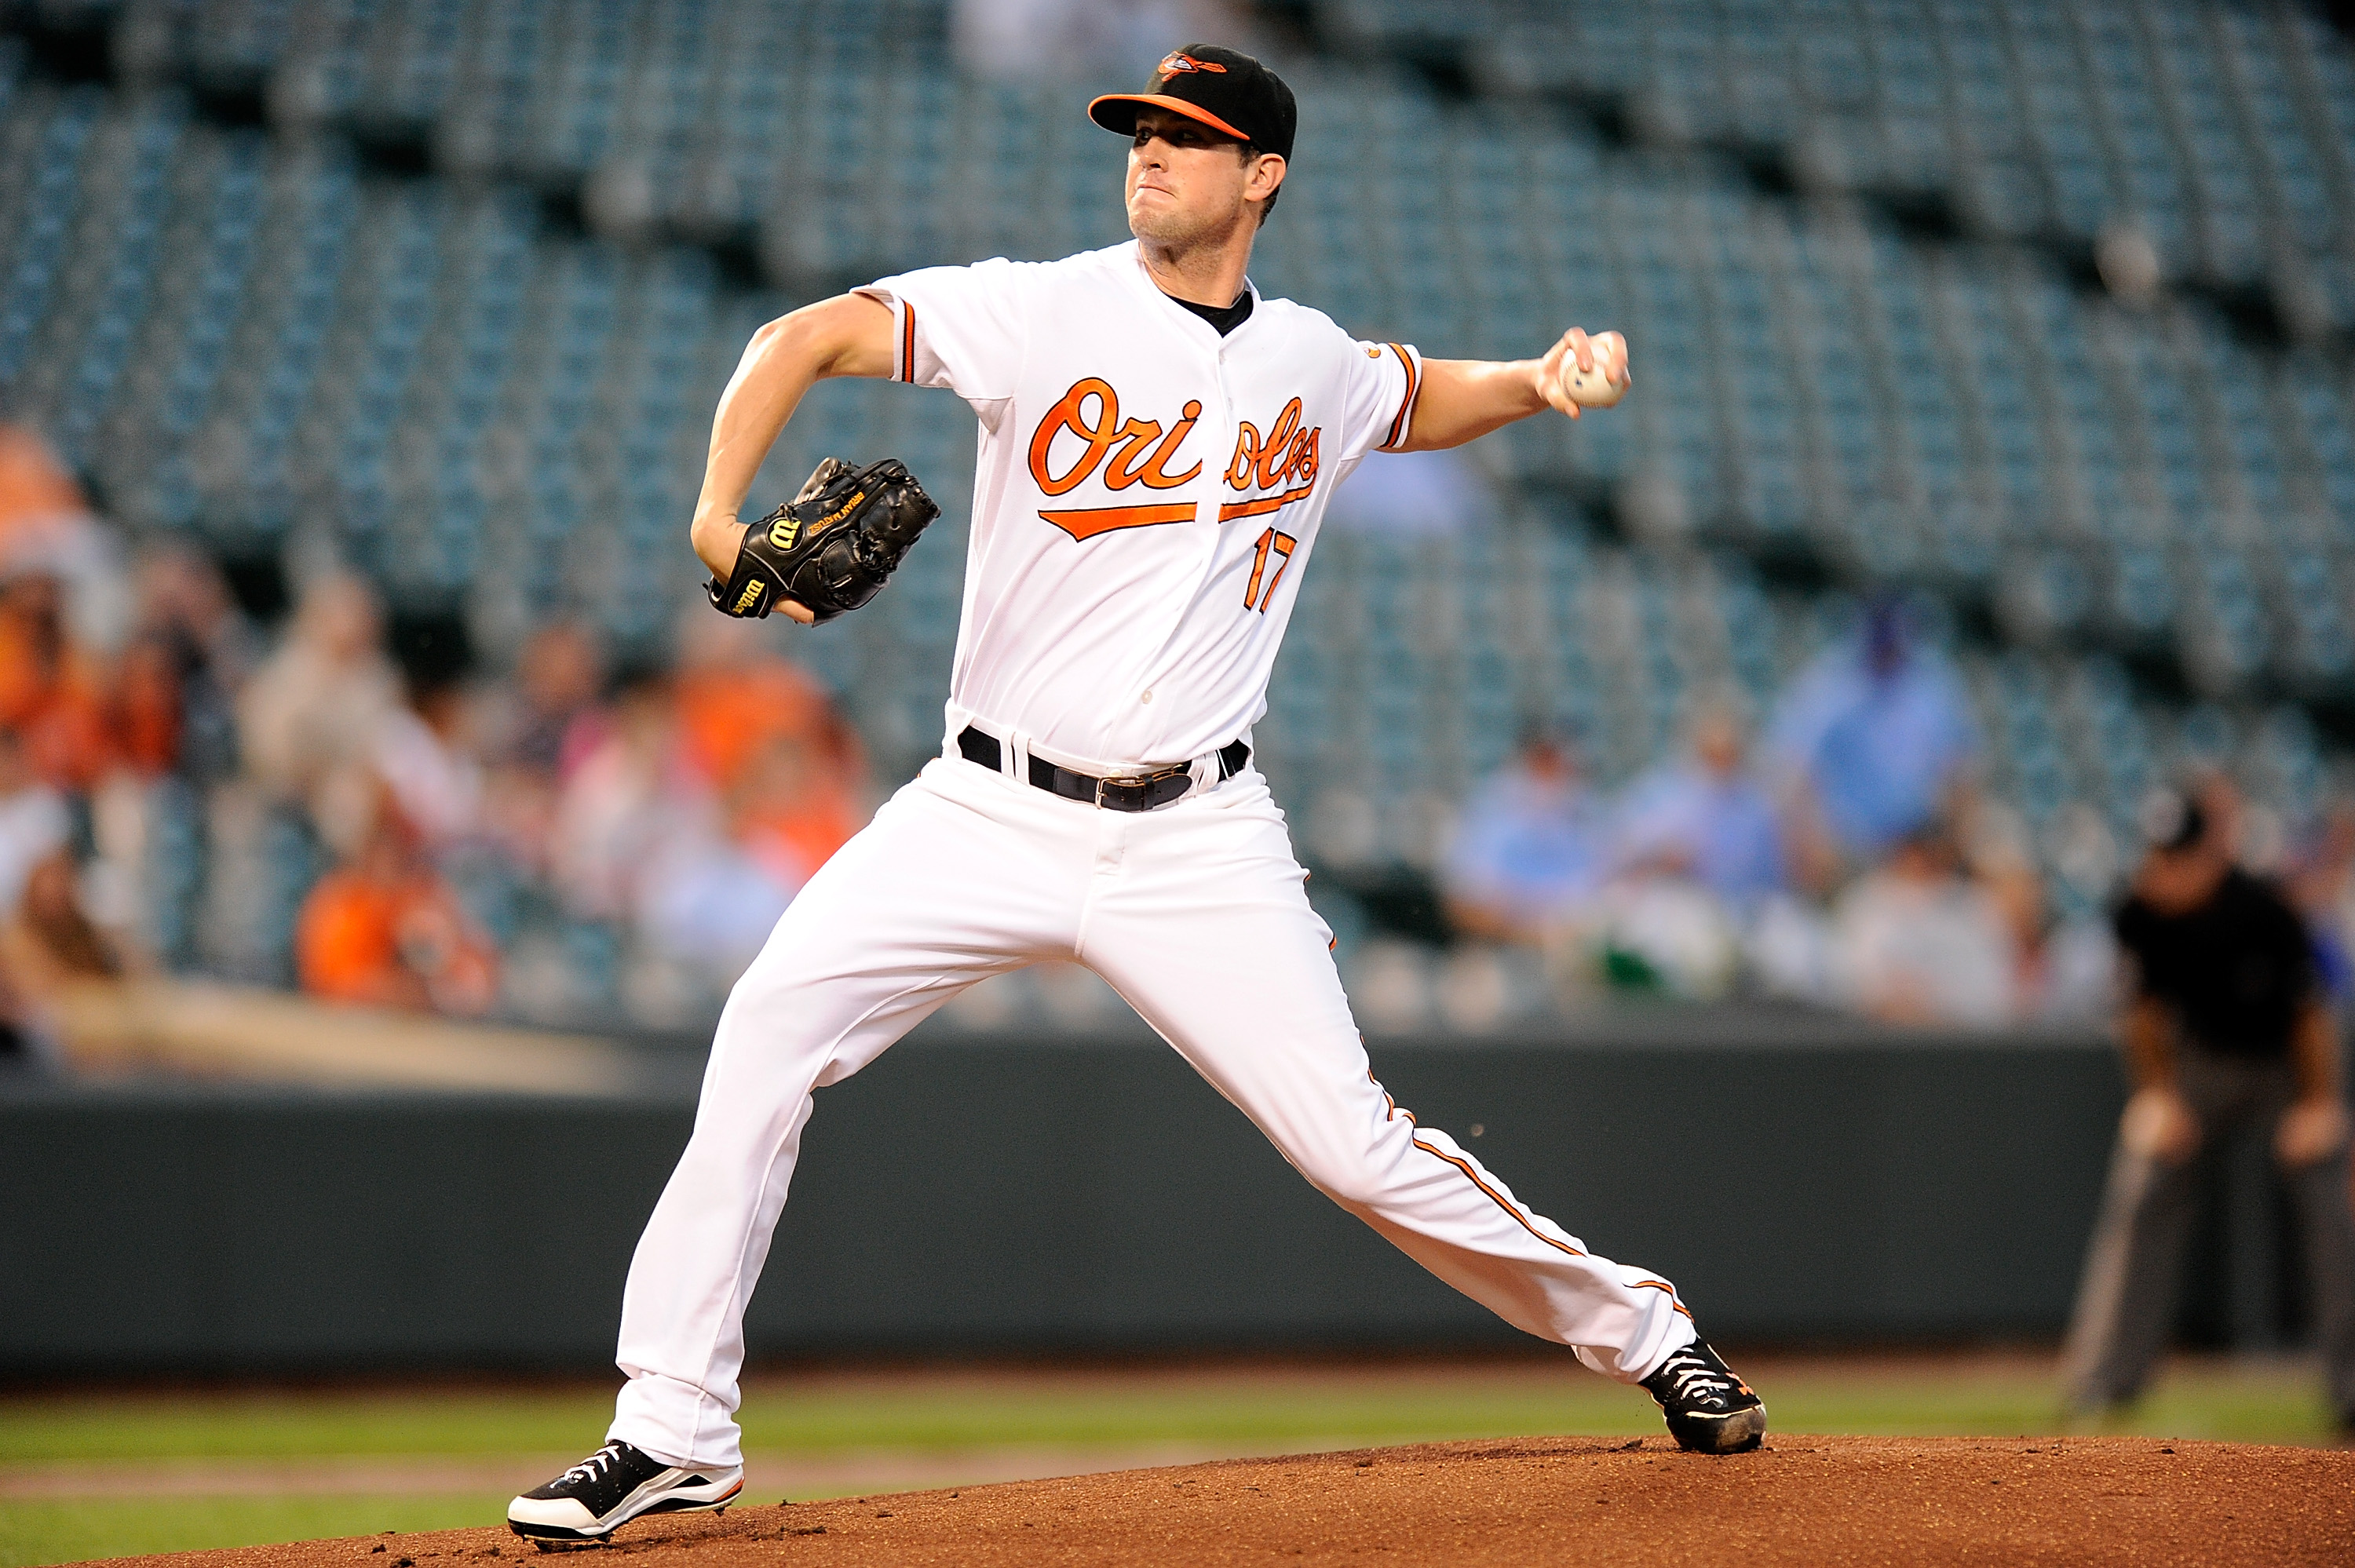 BALTIMORE - SEPTEMBER 13:  Brian Matusz #17 of the Baltimore Orioles pitches against the Toronto Blue Jays at Camden Yards on September 13, 2010 in Baltimore, Maryland.  (Photo by Greg Fiume/Getty Images)